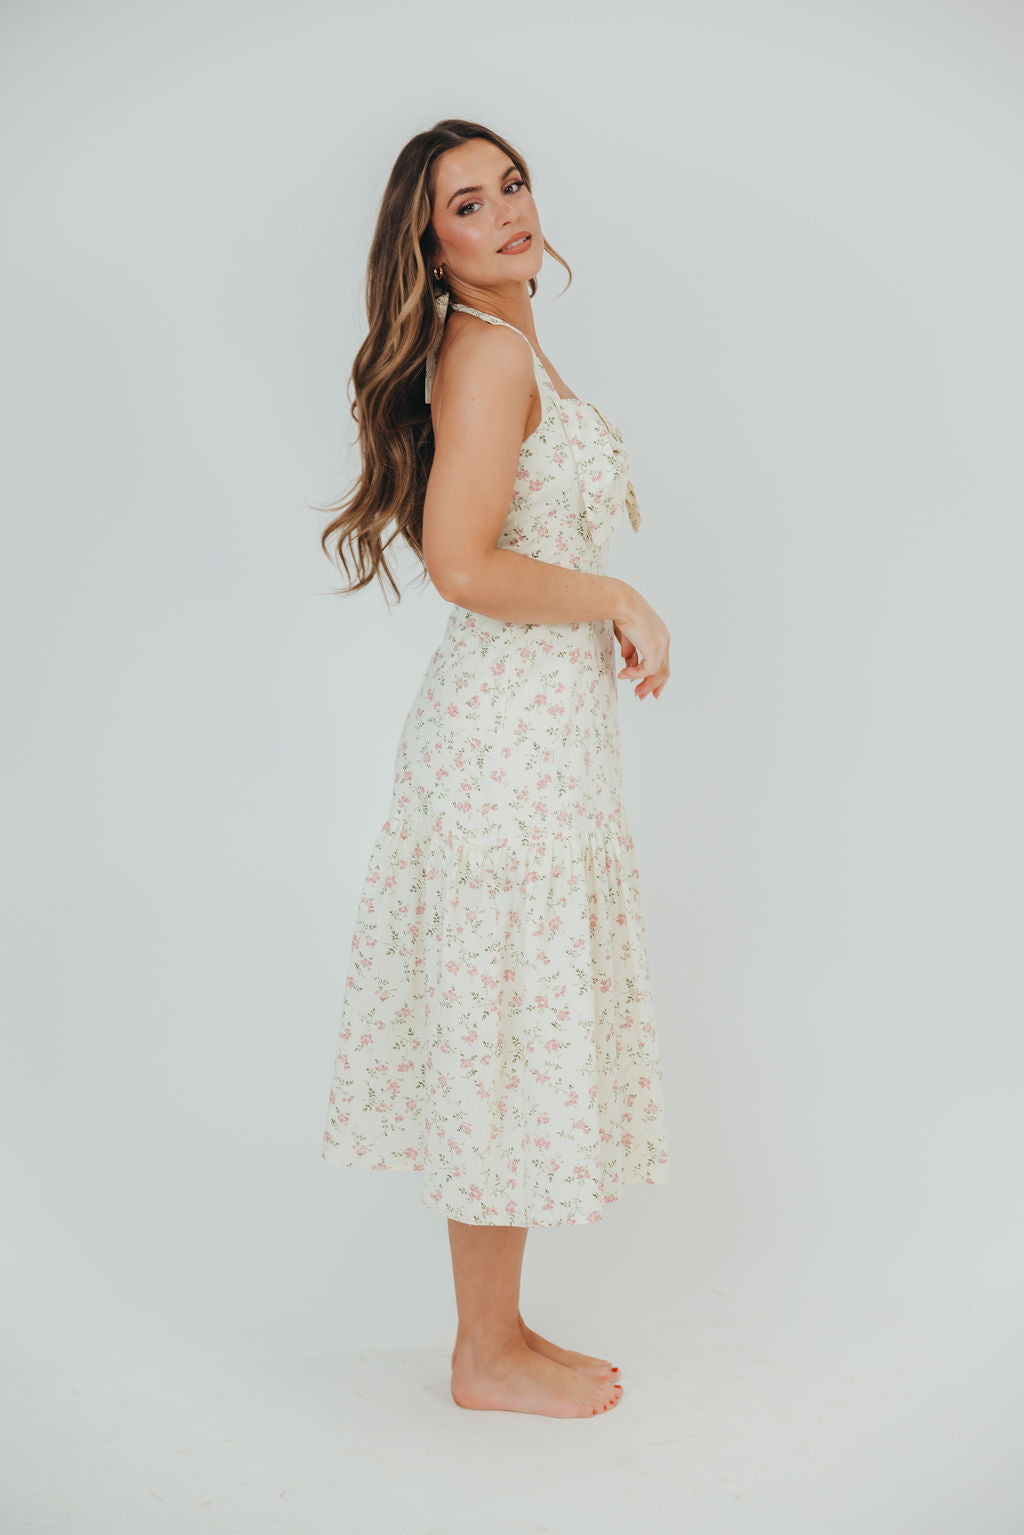 Taylor 100% Cotton Midi Dress with Bow Detail in Cream & Pink Floral